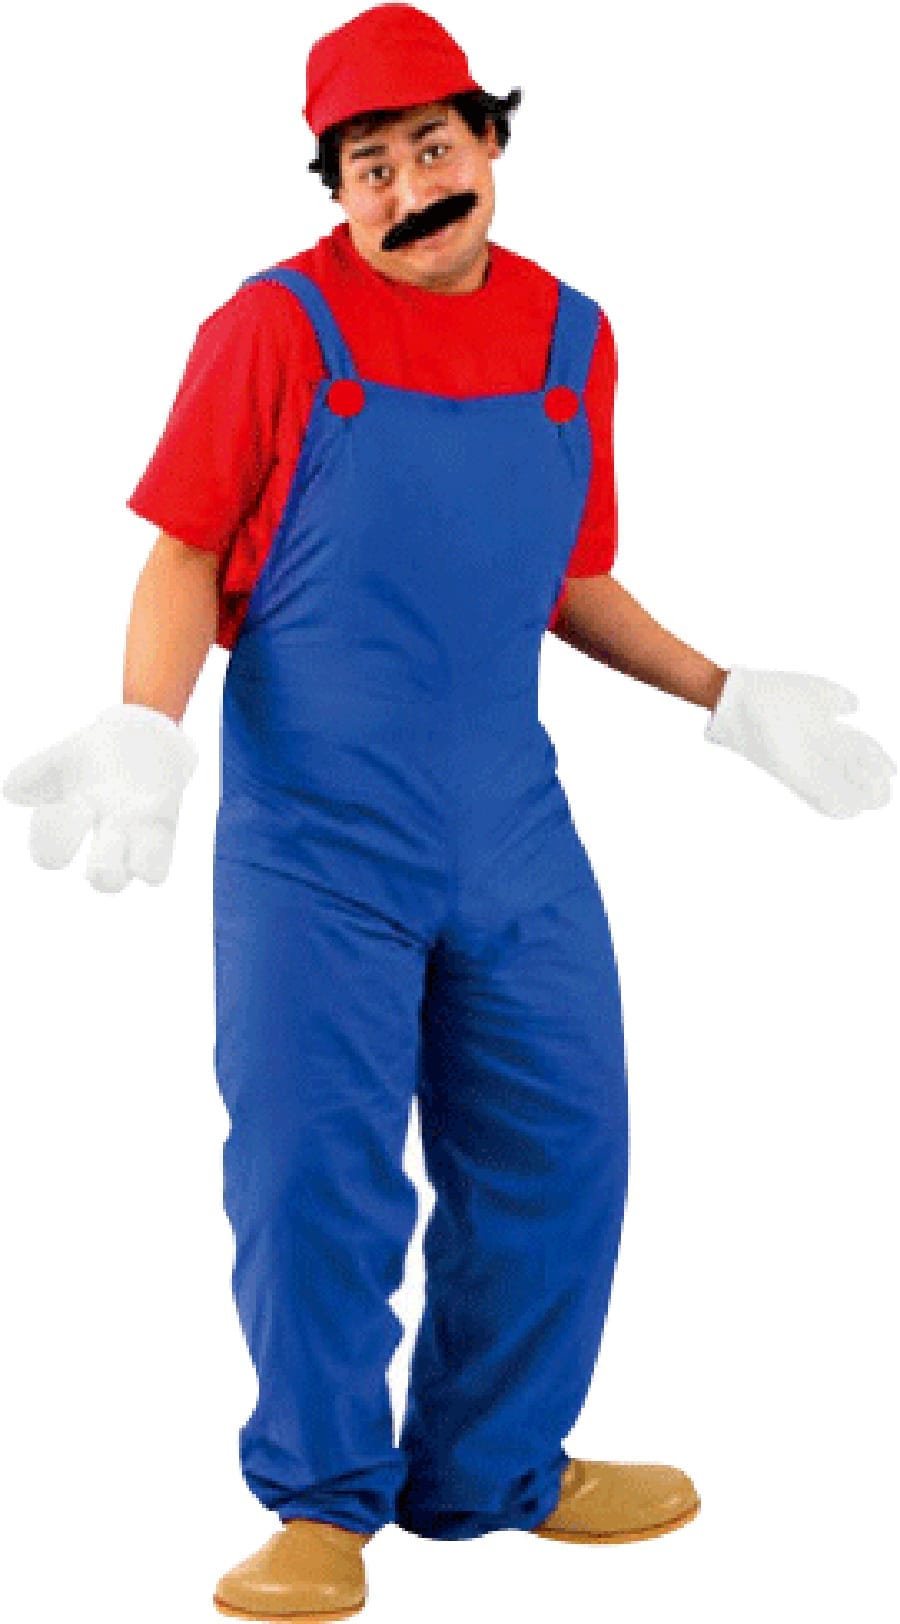 Featured image for “Super M Plumber, Adult”